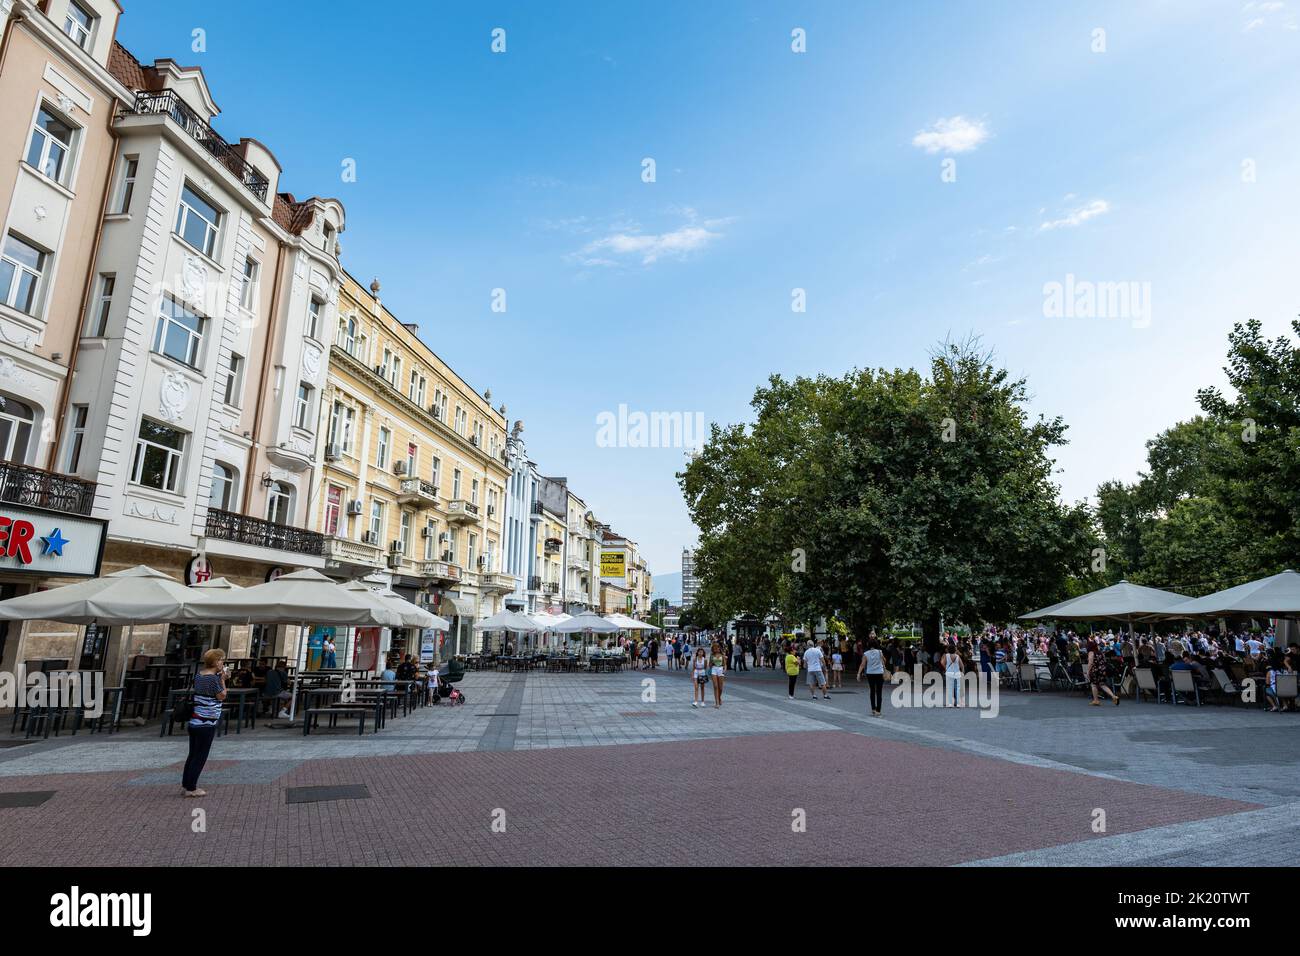 Plovdiv, Bulgaria - August 2022: Plovdiv city view with the main pedestrian street. The main street of Plovdiv 'Glavnata' Stock Photo